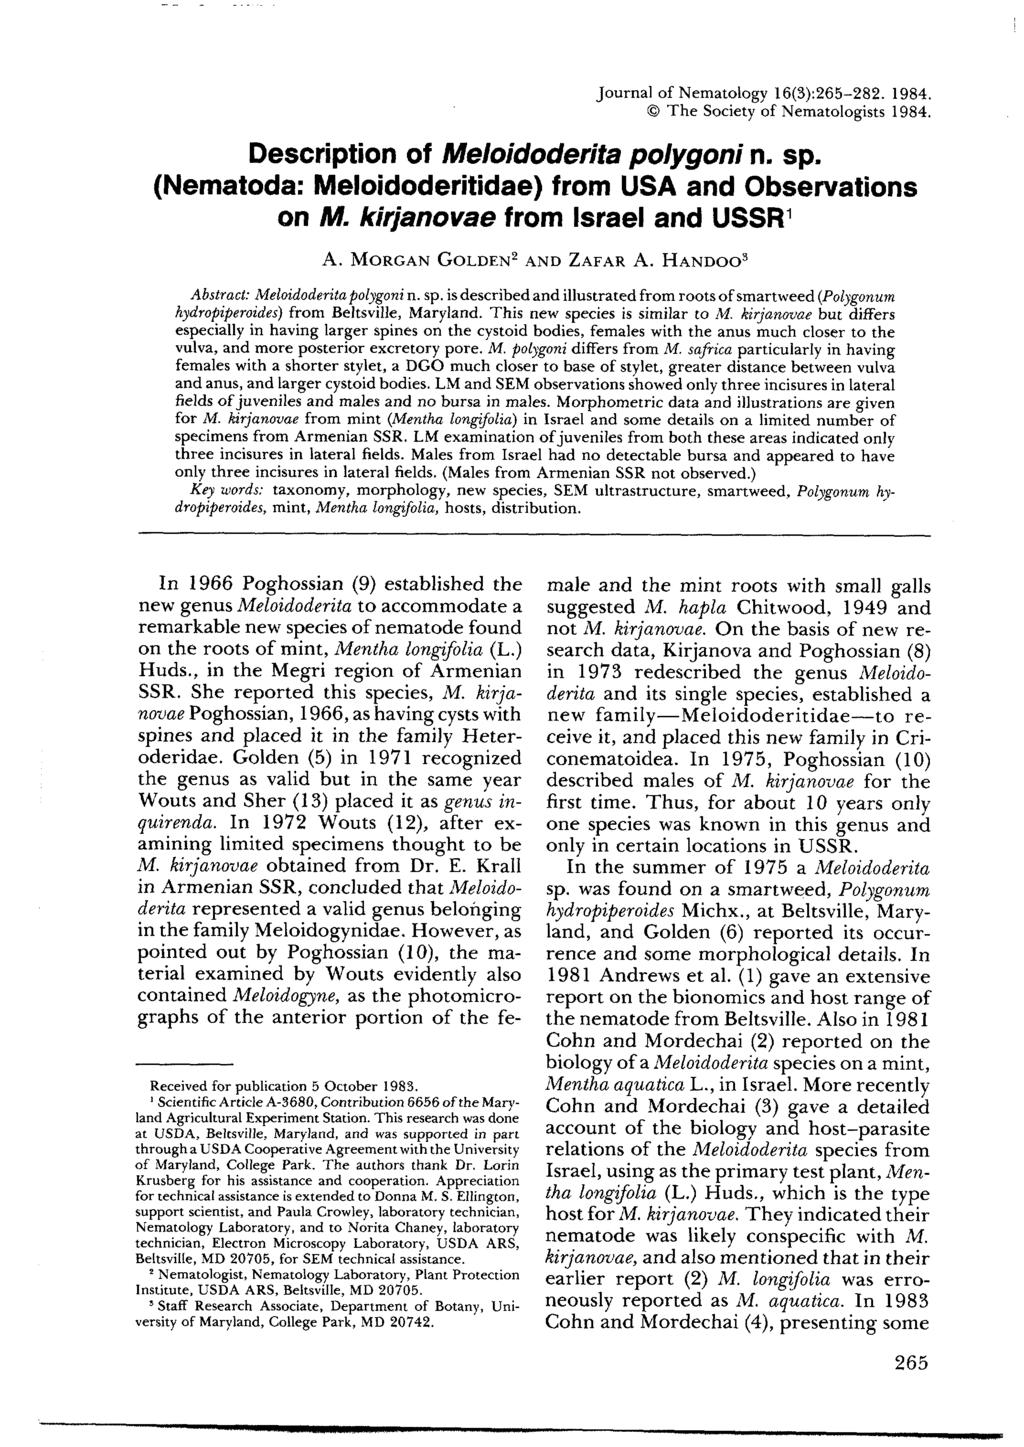 Journal of Nematology 16(3):265-282. 1984. The Society of Nematologists 1984. Description of Meloidoderita polygoni n. sp. (Nematoda: Meloidoderitidae) from USA and Observations on M.